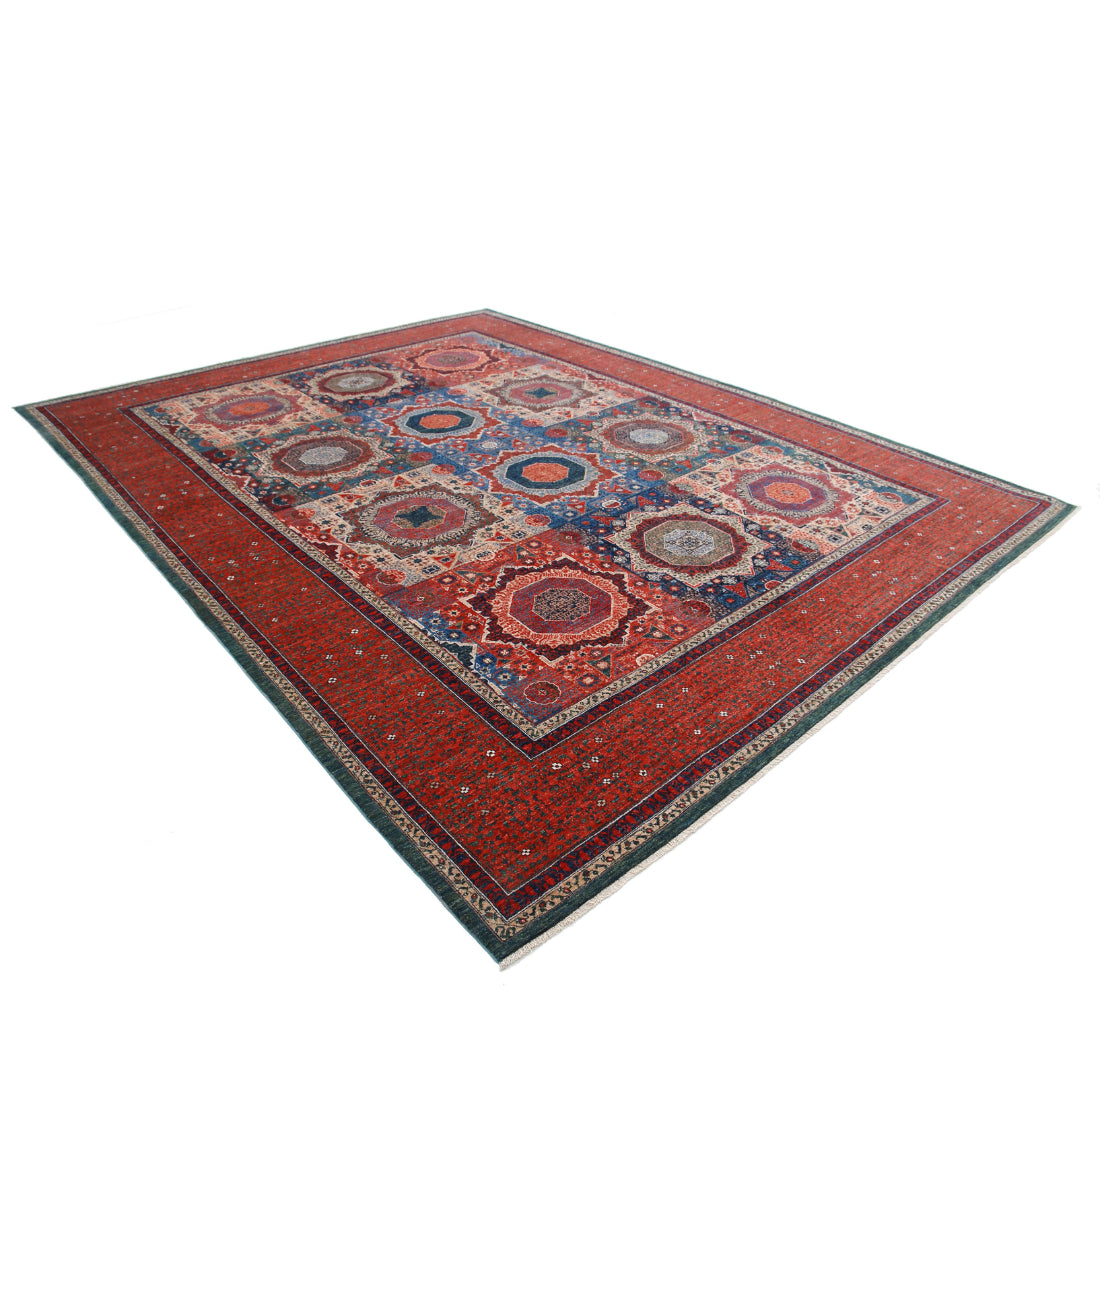 Hand Knotted Fine Mamluk Wool Rug - 10'2'' x 13'0'' 10'2'' x 13'0'' (305 X 390) / Green / Red